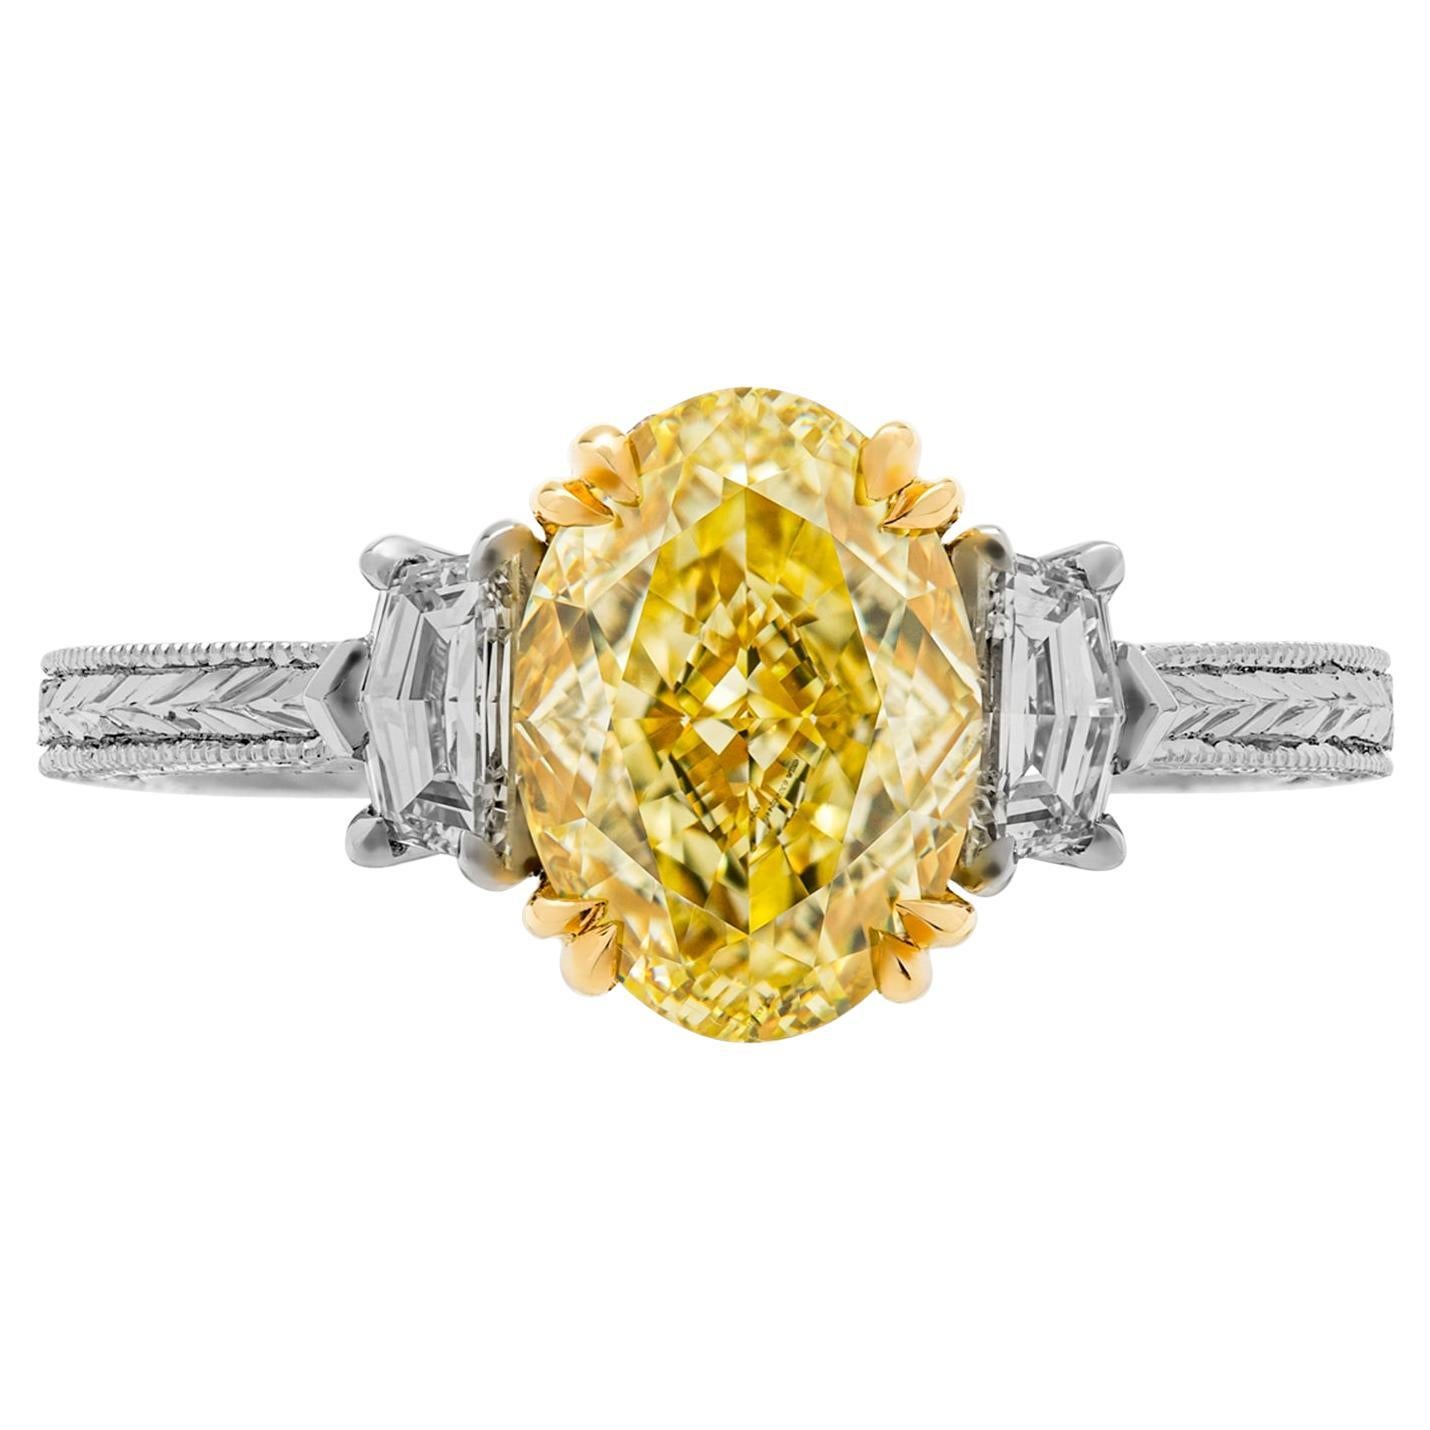 Fancy 3 stone ring in 18K & Pt950;
 Filigree shank; diamond basket under center stone;  
TCW of melee: 0.15ct 
Side stones: 0.44ct (total)  Cadillac shape diamonds; 
Center Stone: Oval 2.40ct Natural Fancy Yellow, VVS1, GIA#6302448878

Comes with